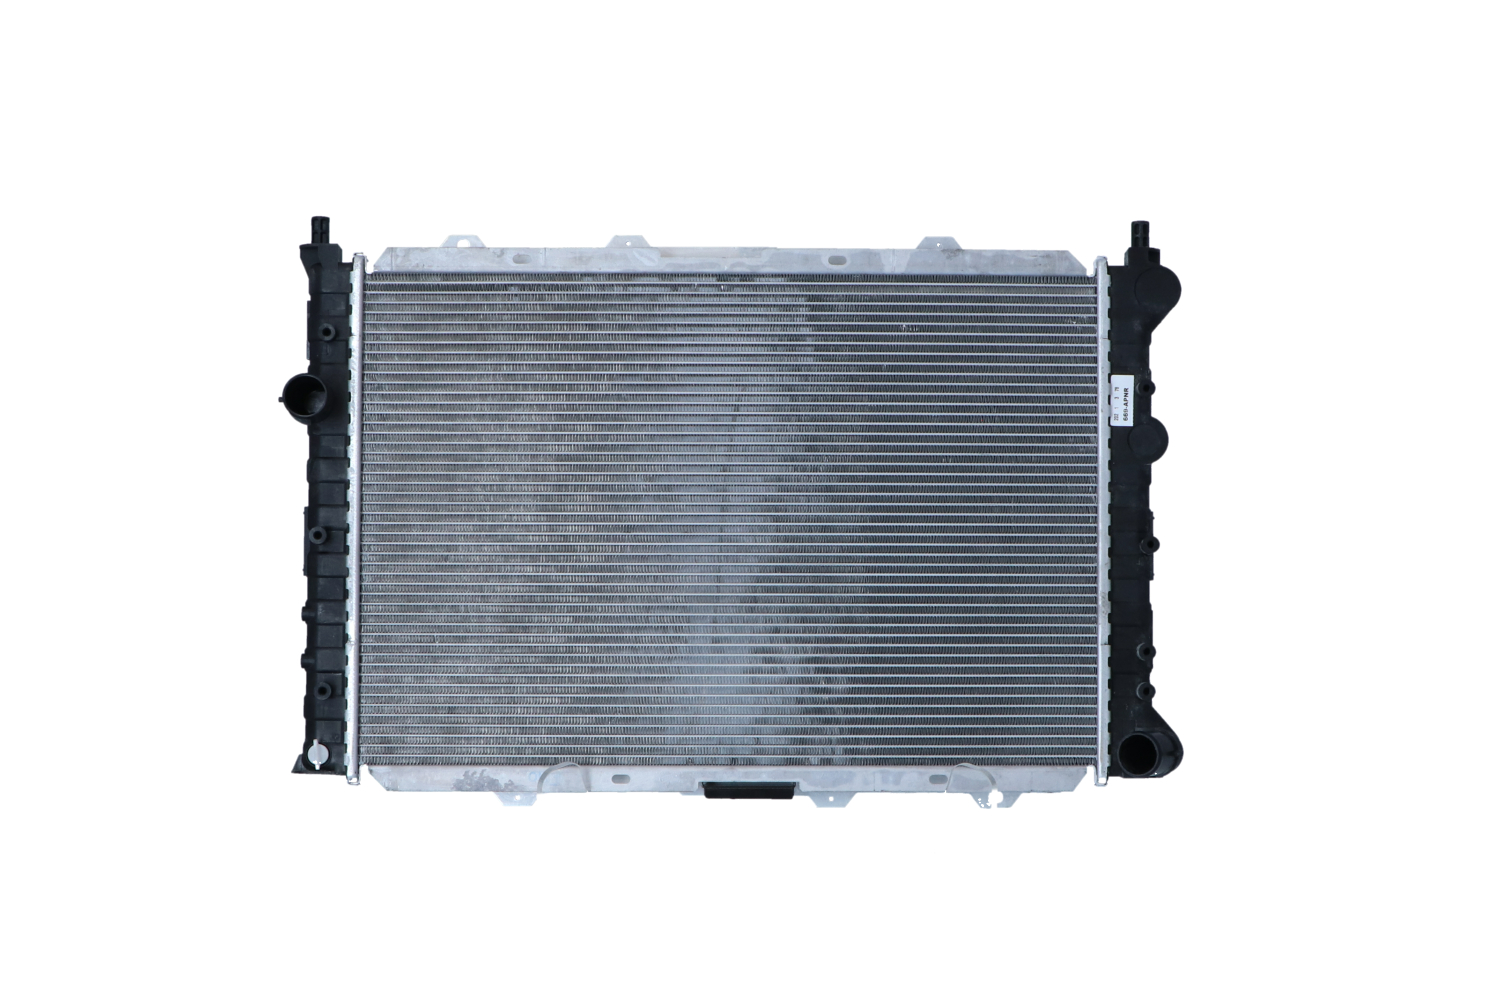 NRF 58202 Engine radiator Aluminium, 580 x 387 x 24 mm, with mounting parts, Brazed cooling fins